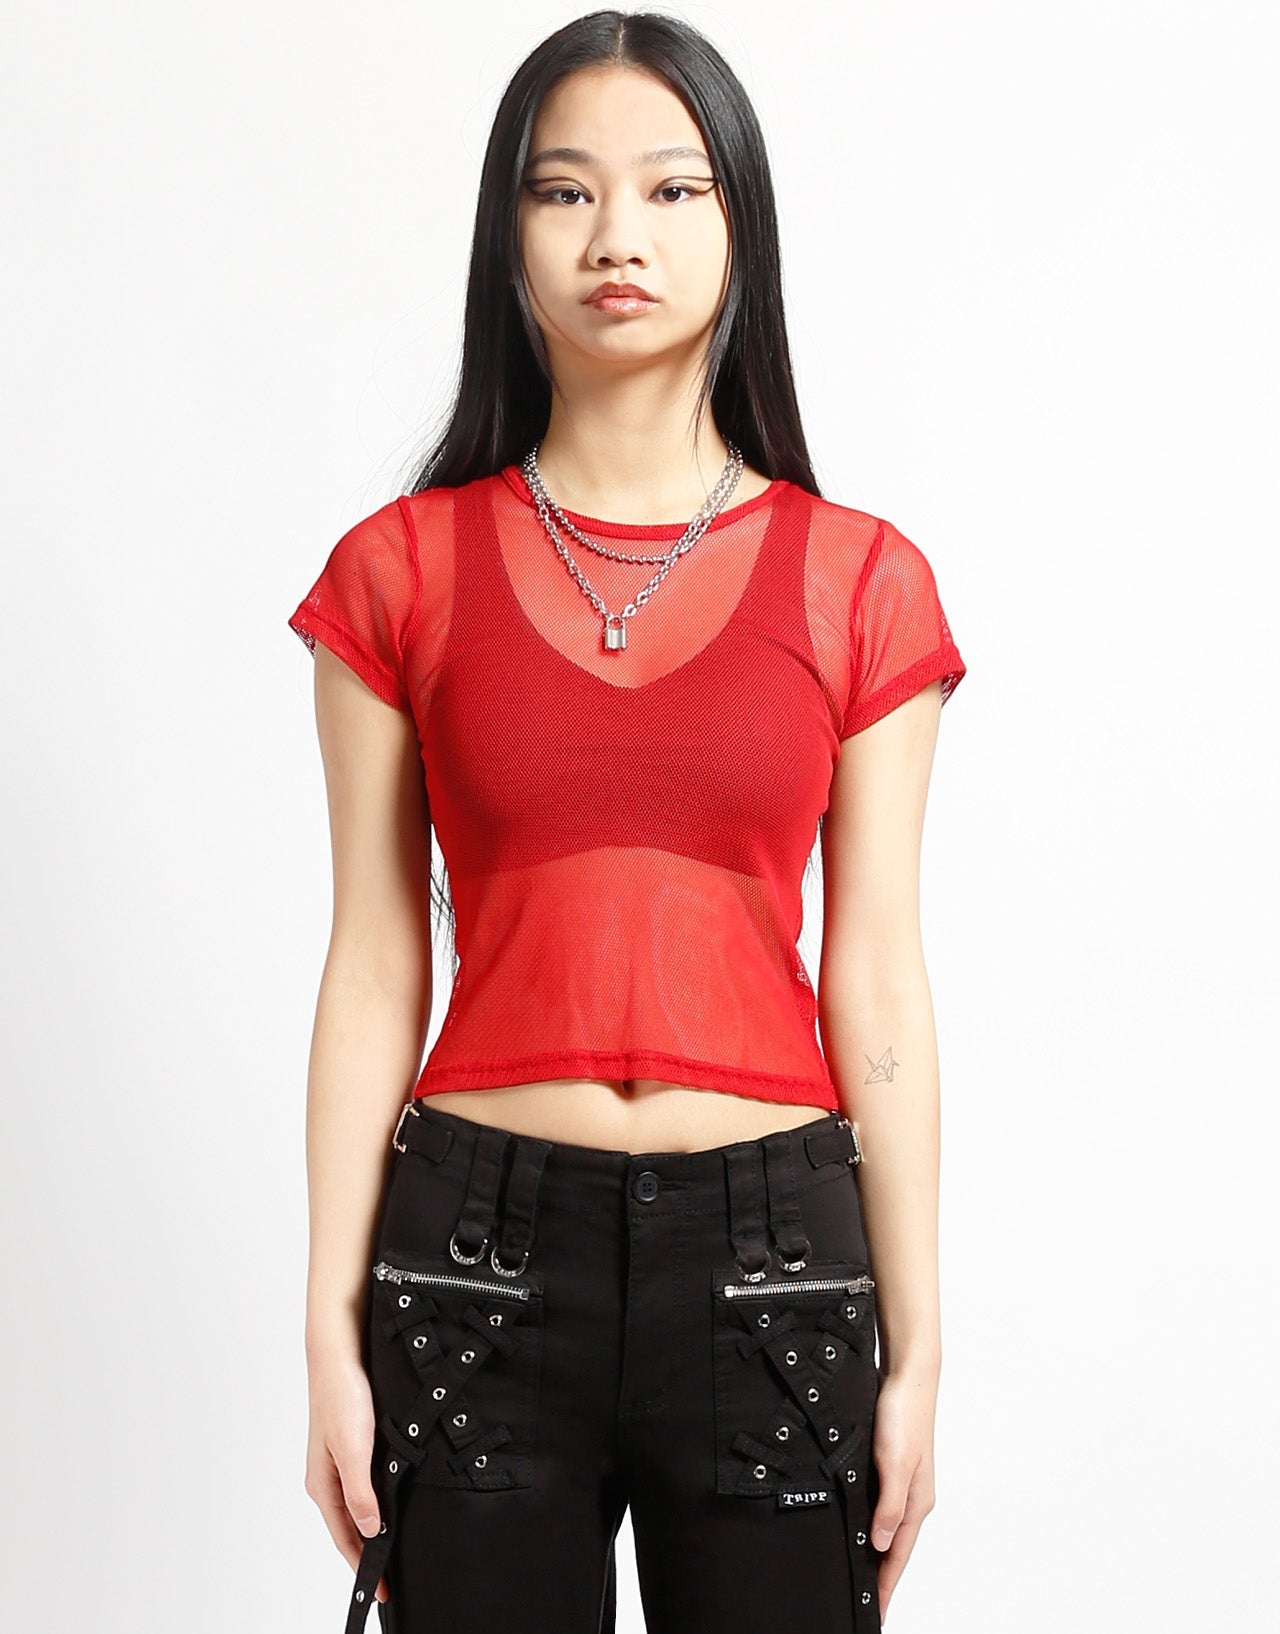 A model wearing the red Baby Short Sleeve Fishnet Tee Shirt with black pants, front view.